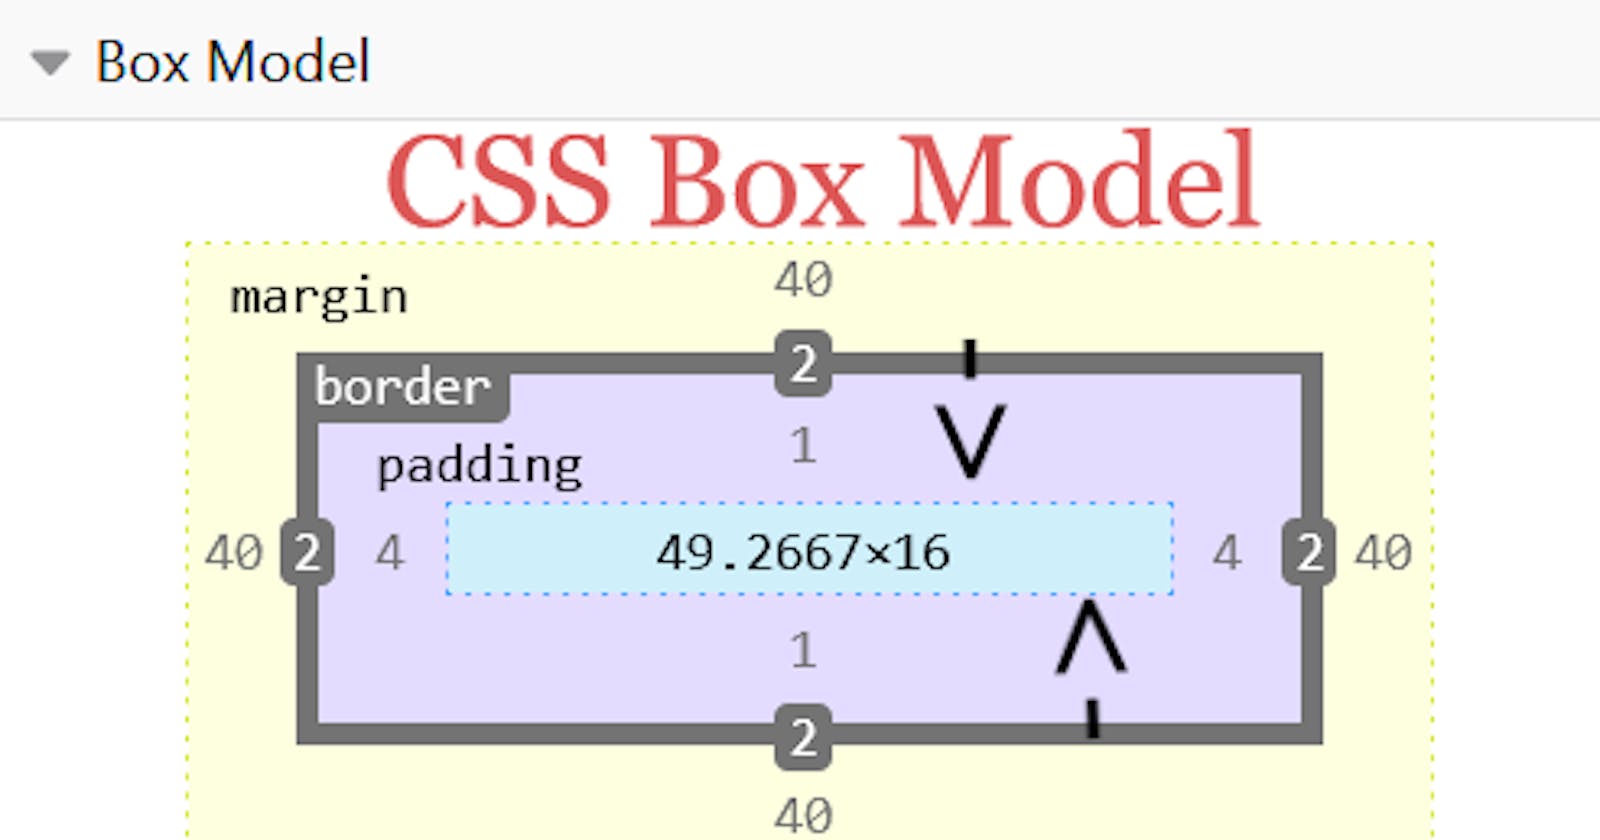 Detail guide on CSS Box Model